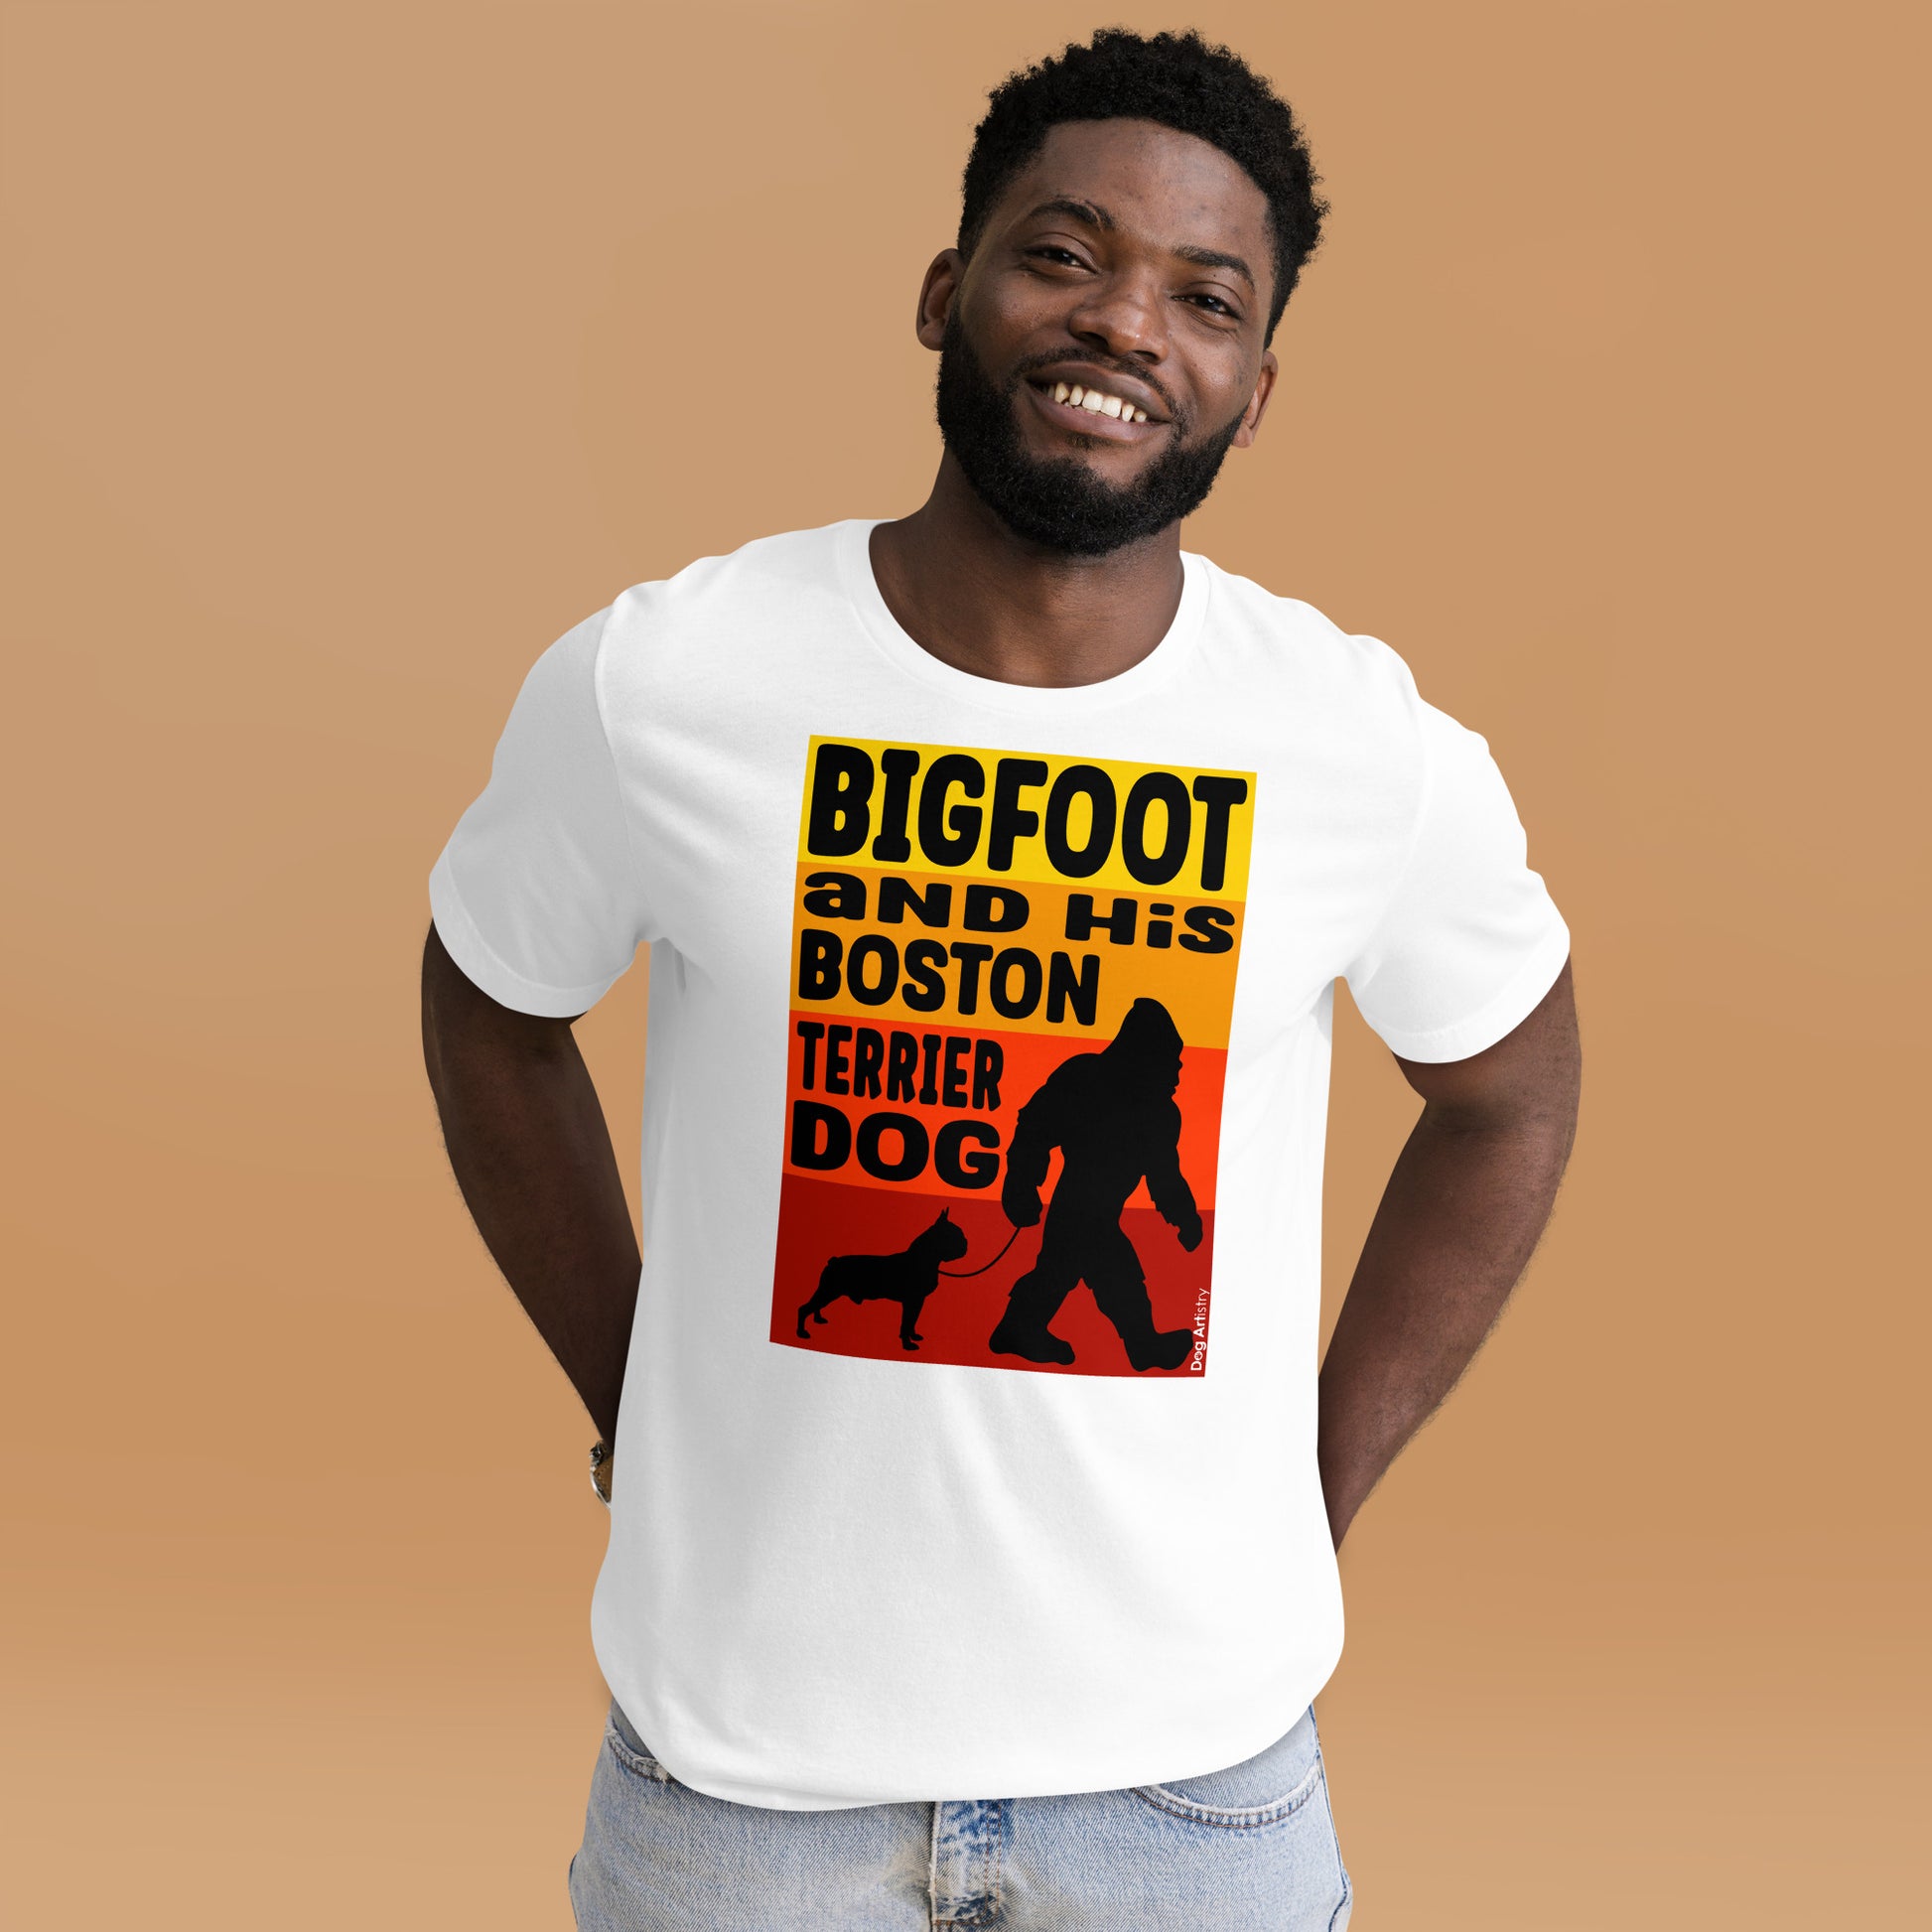 Big foot and his Boston Terrier unisex white t-shirt by Dog Artistry.